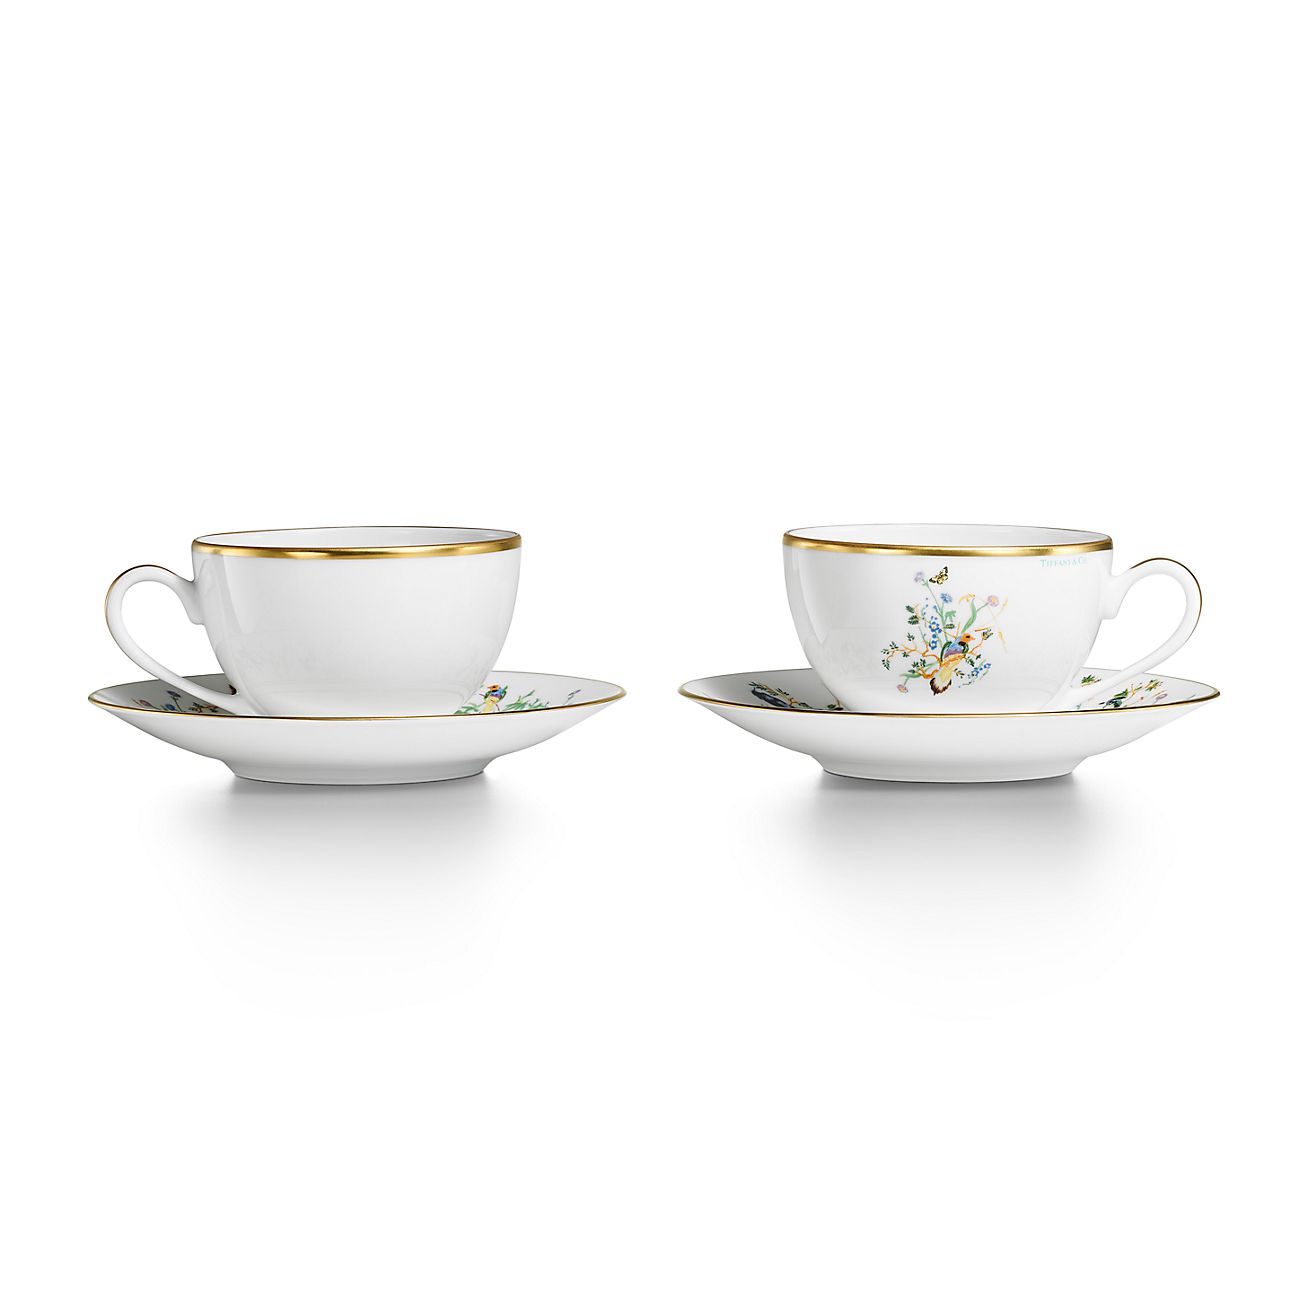 Tiffany Audubon Teacup and Saucer in Porcelain, Set of Two, Size: 7.7 in.